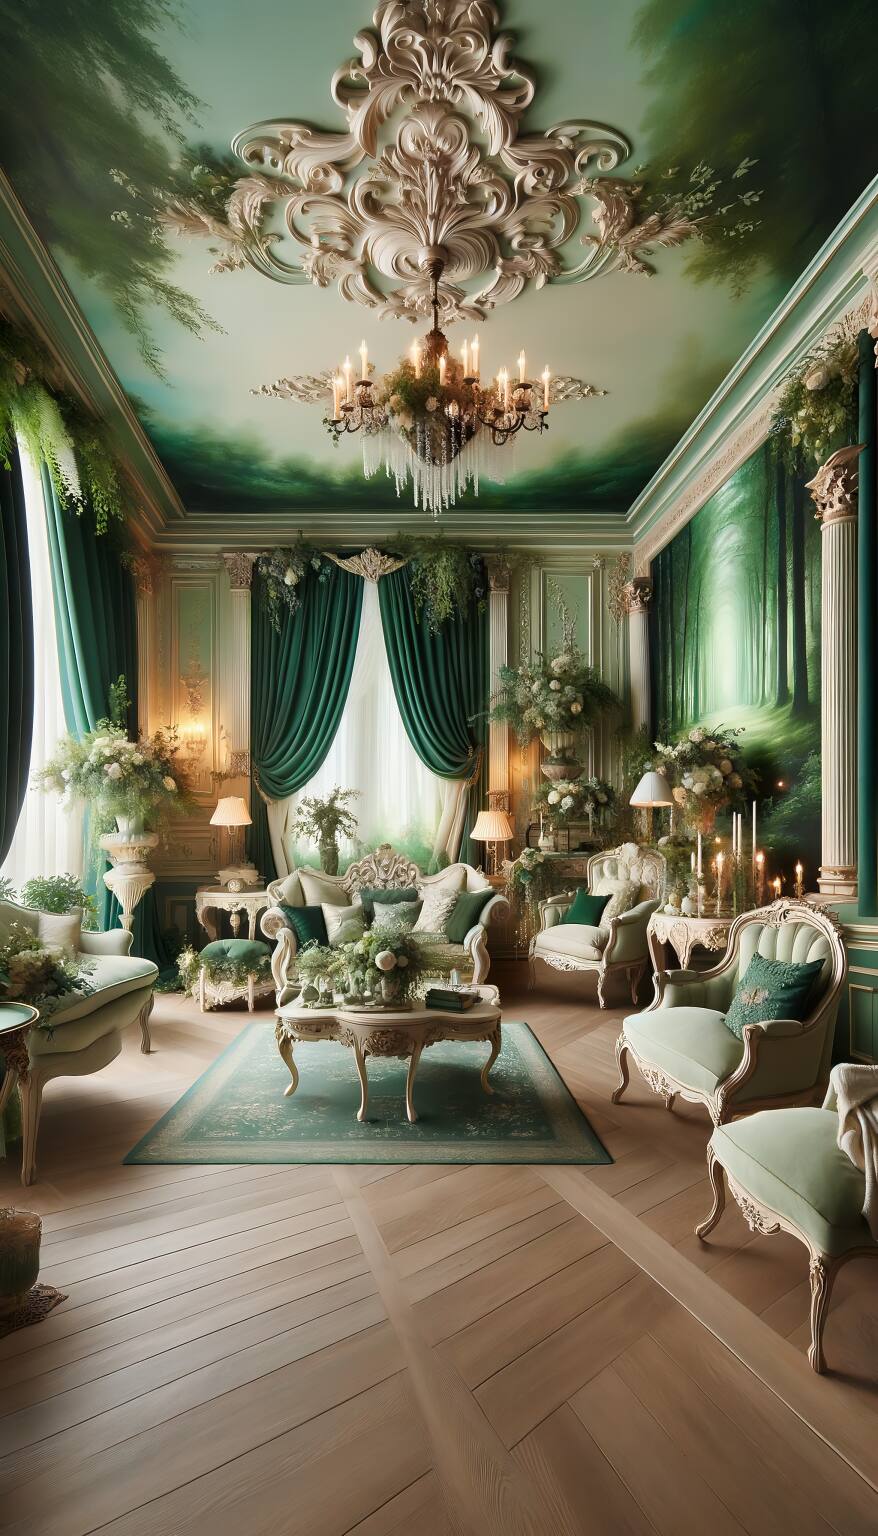 Discover The Tranquility Of This Emerald And Cream Romantic Living Room. Elegant Furnishings Set Against A Backdrop Of Serene Emerald Hues Create A Peaceful Oasis For Love And Relaxation.